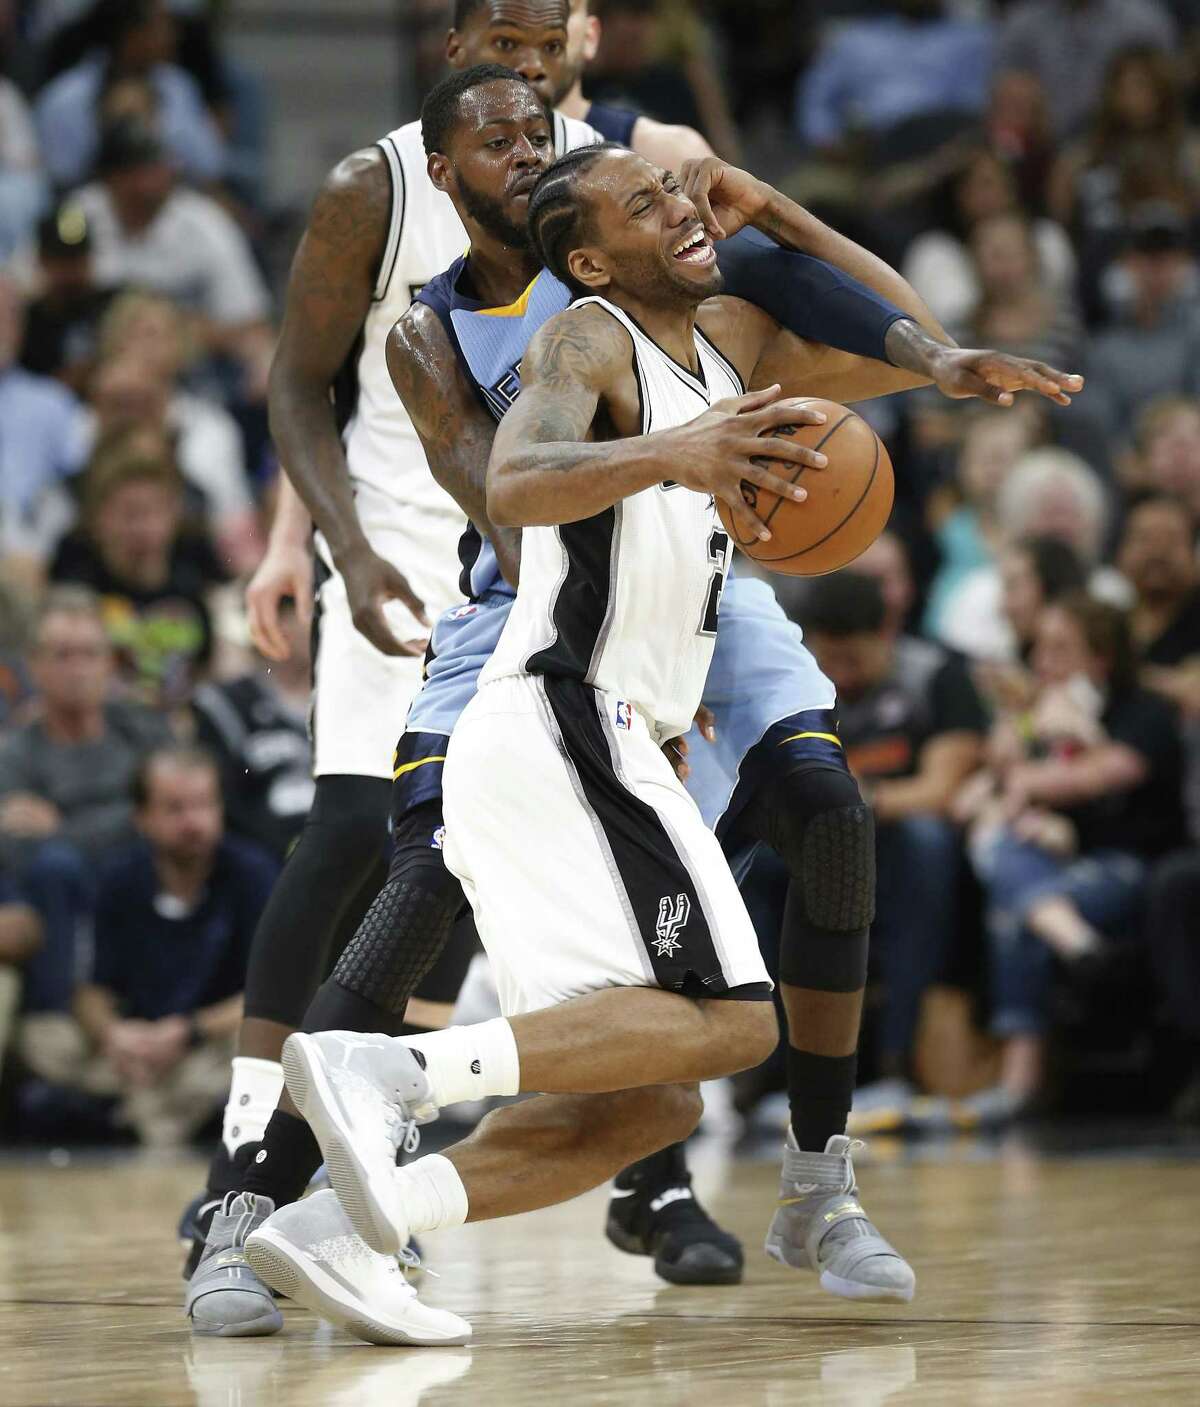 Spurs’ Kawhi Leonard gets fouled by the Memphis Grizzlies’ JaMychal Green at the AT&T Center on April 4, 2017.